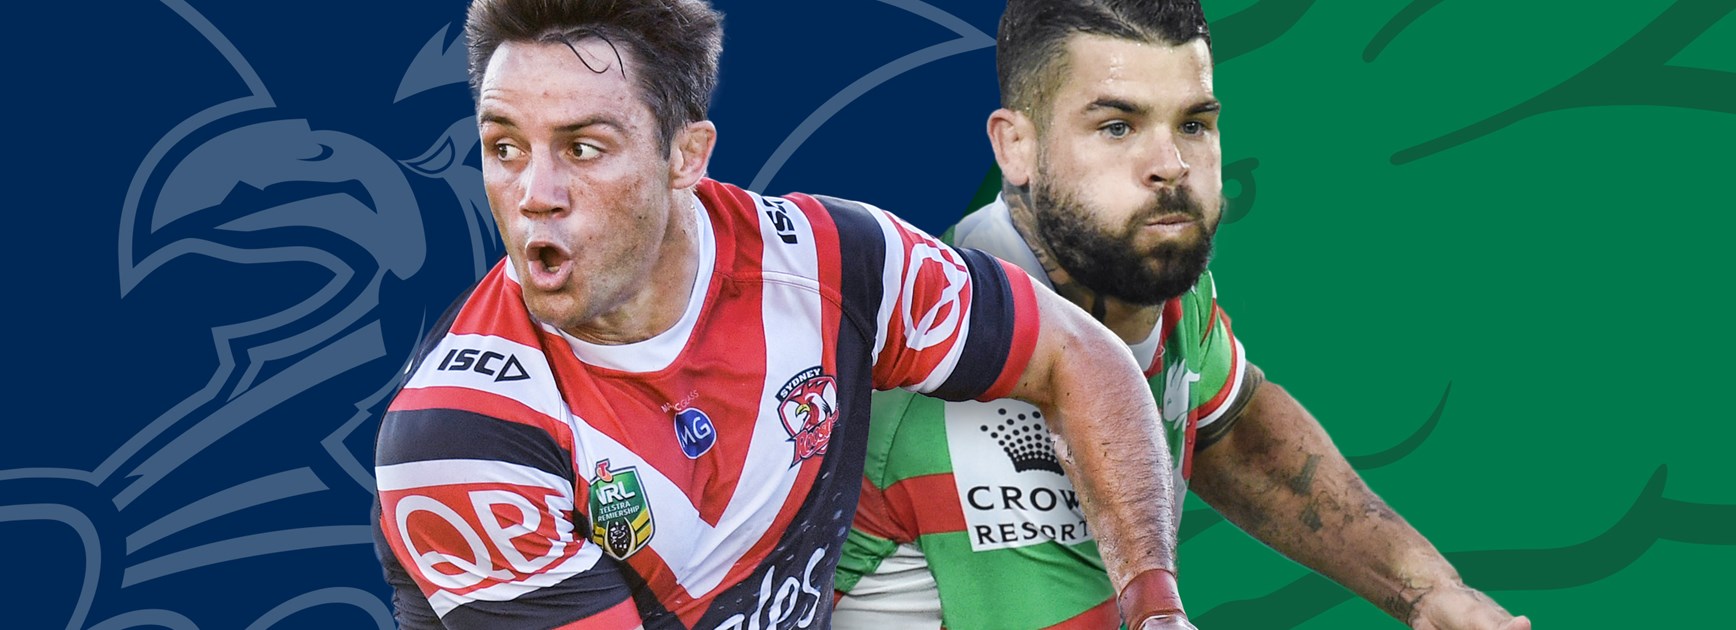 Roosters v Rabbitohs: Momirovski replaces Latrell; Souths lose Clark